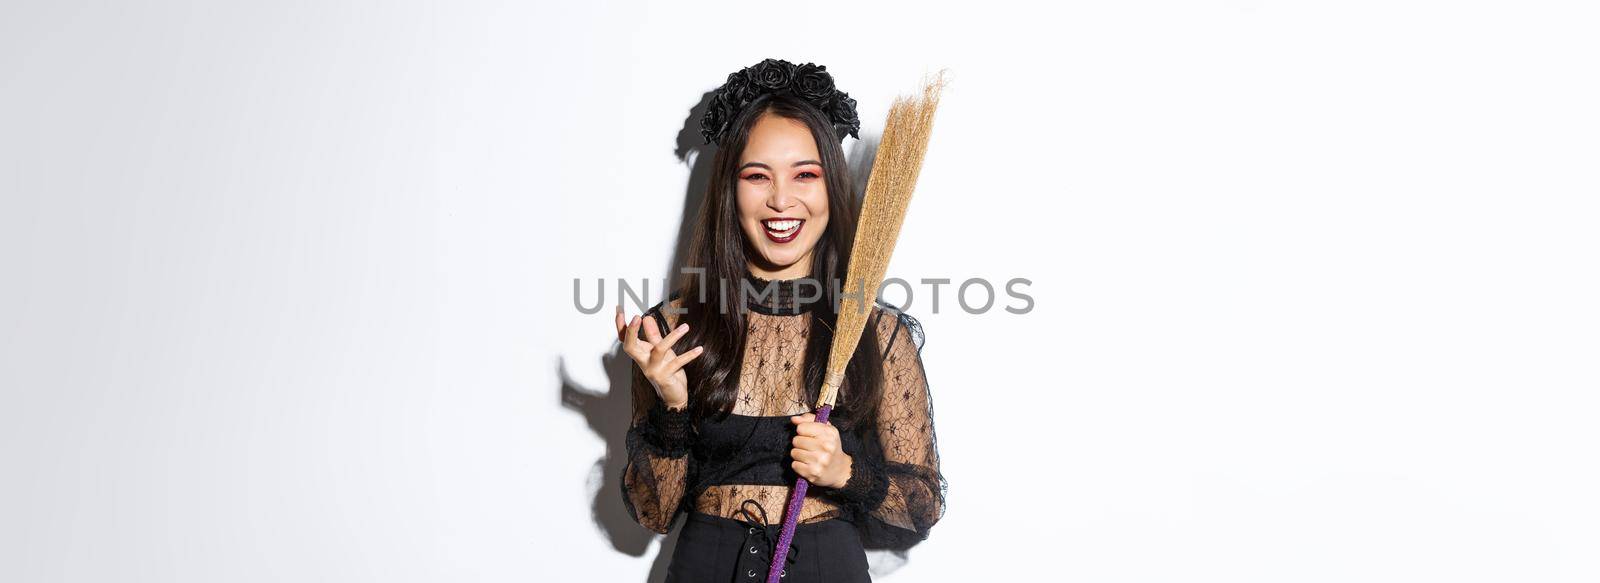 Image of witch in gothic lace dress and black wreath making evil laugh and holding broom, celebrating halloween, standing over white background.